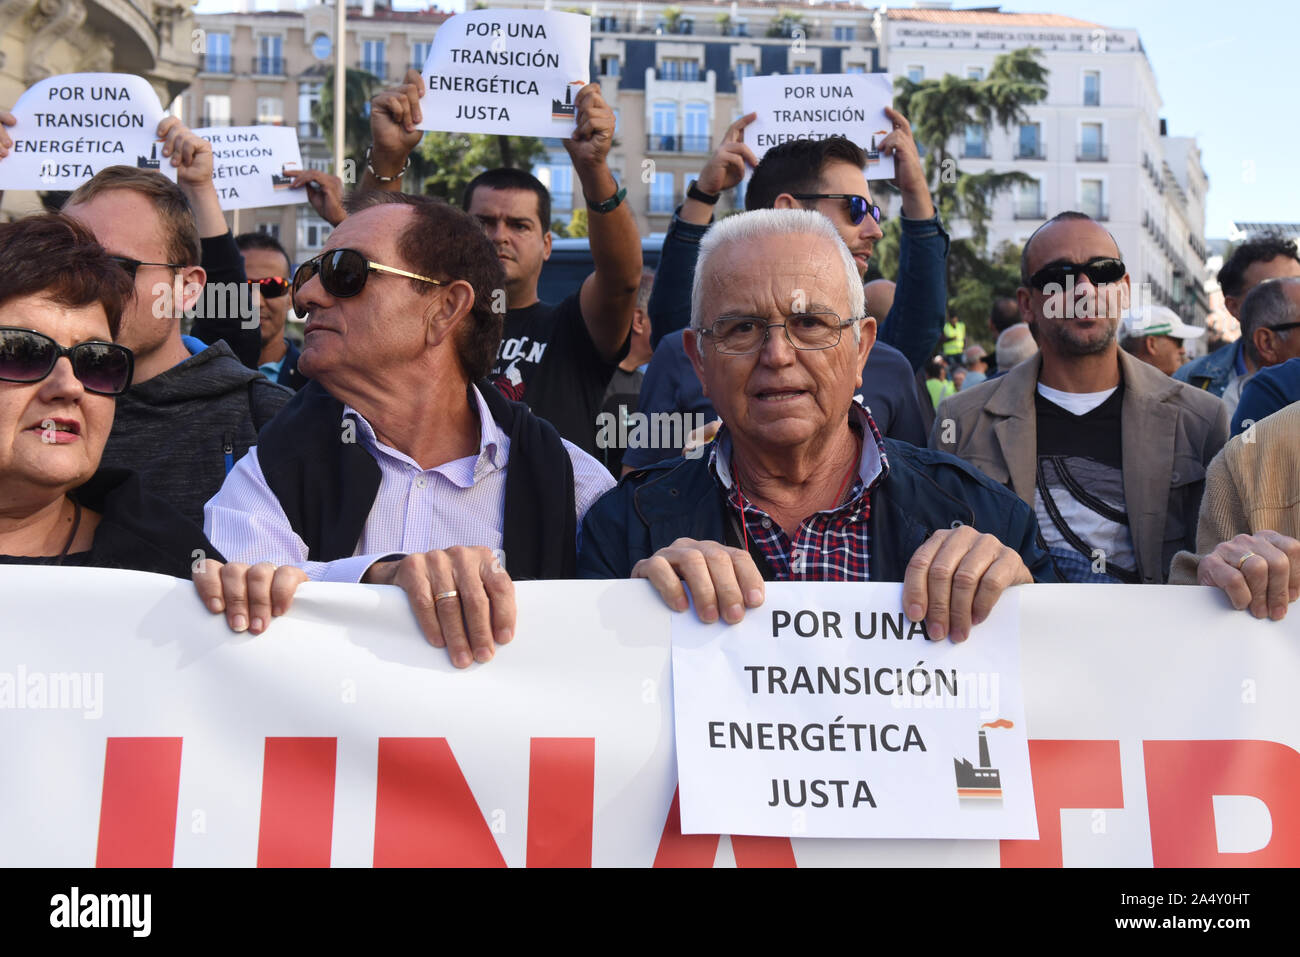 Madrid, Spain. 16th Oct, 2019. Protesters hold placards while shouting slogans during the demonstration.Around 1.000 Endesa 'As Pontes' plant workers gathered in front of the Congreso de los Diputados in Madrid to protest against the closure of this thermal power plant. They demanded from the Spanish government a fair energy transition plan. Credit: SOPA Images Limited/Alamy Live News Stock Photo